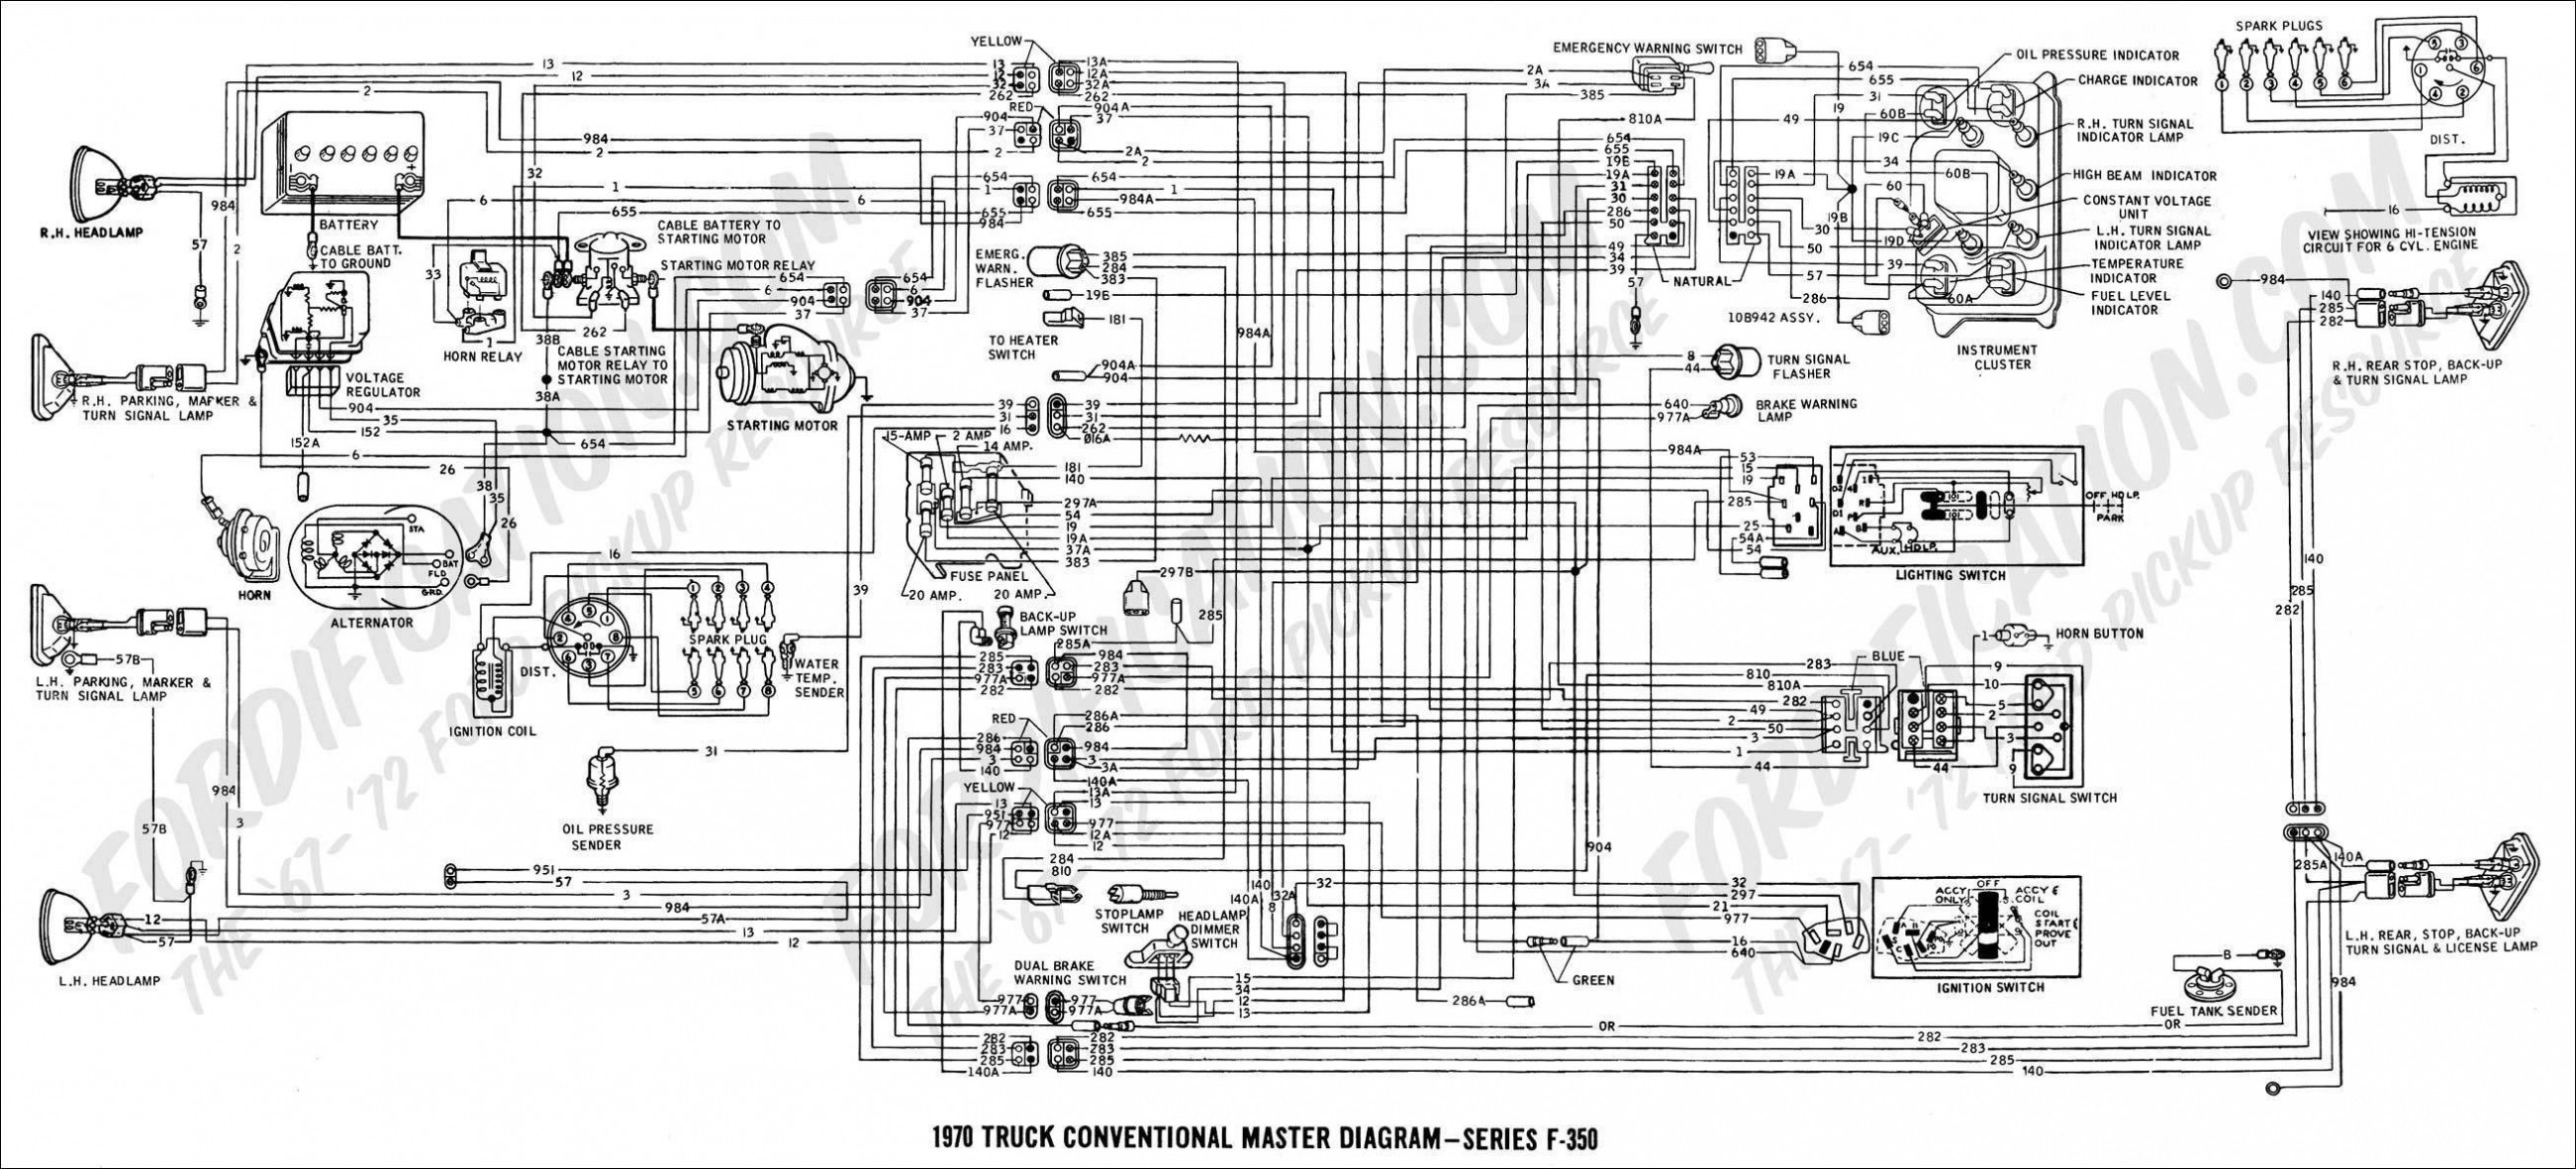 Ford F350 Parts Diagram 2000 ford F350 Starter Wiring Diagram Wiring Diagram Data Val